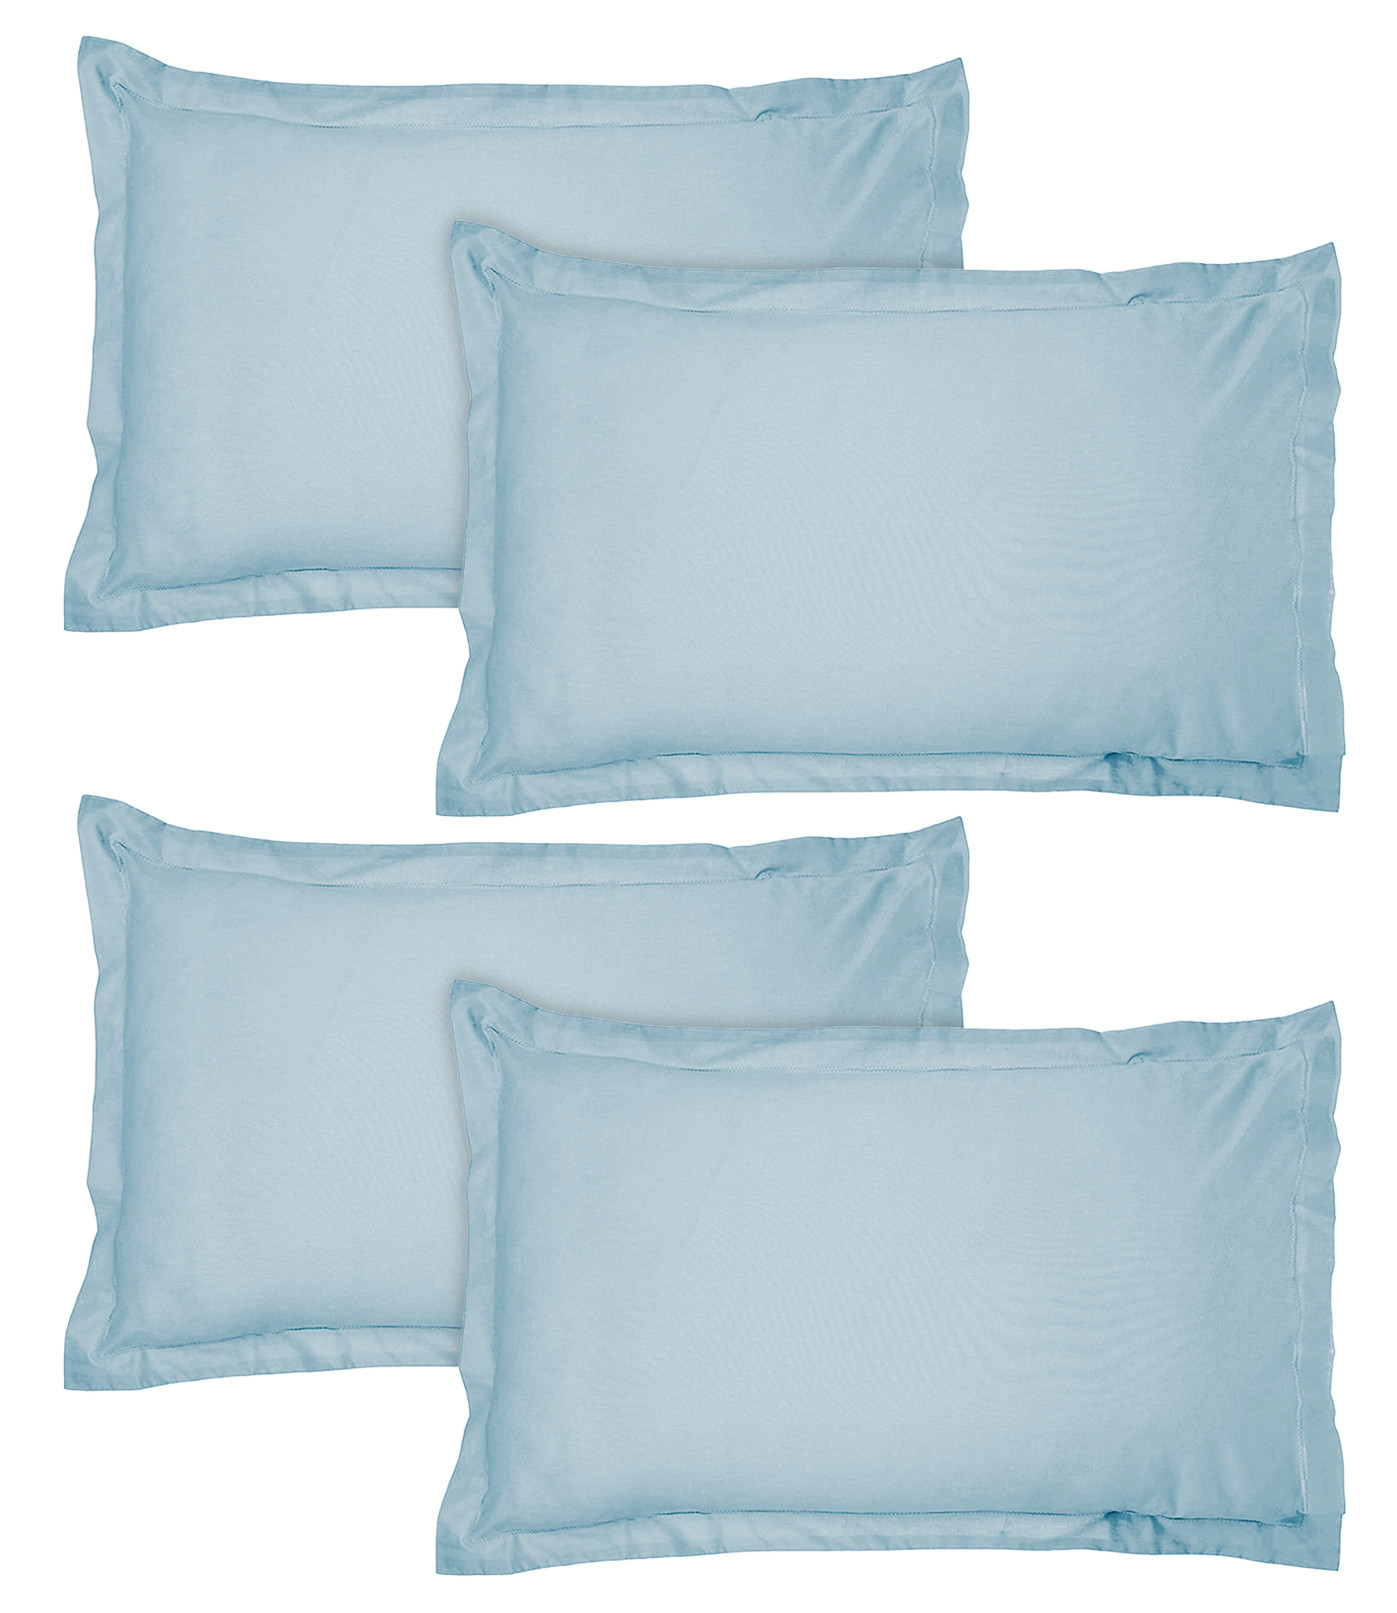 Kuber Industries Breathable & Soft Cotton Pillow Cover For Sofa, Couch, Bed - 29x20 Inch,(Blue)